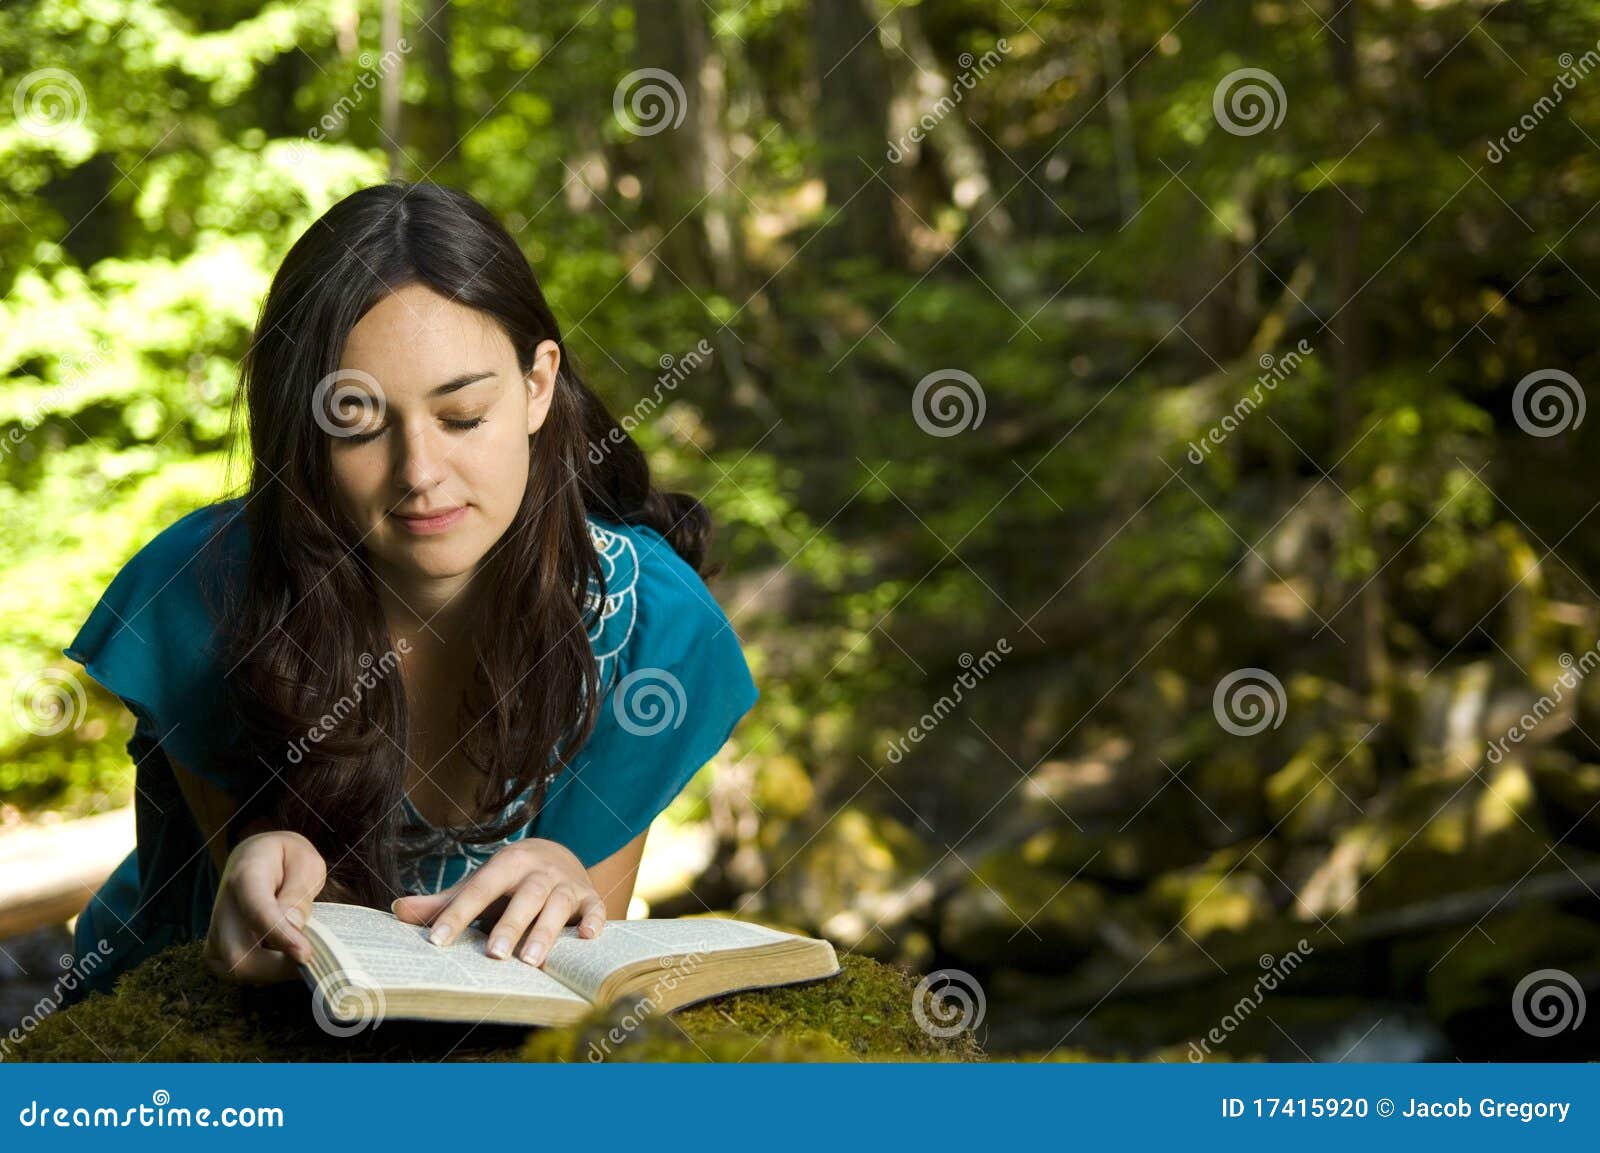 young woman reading bible